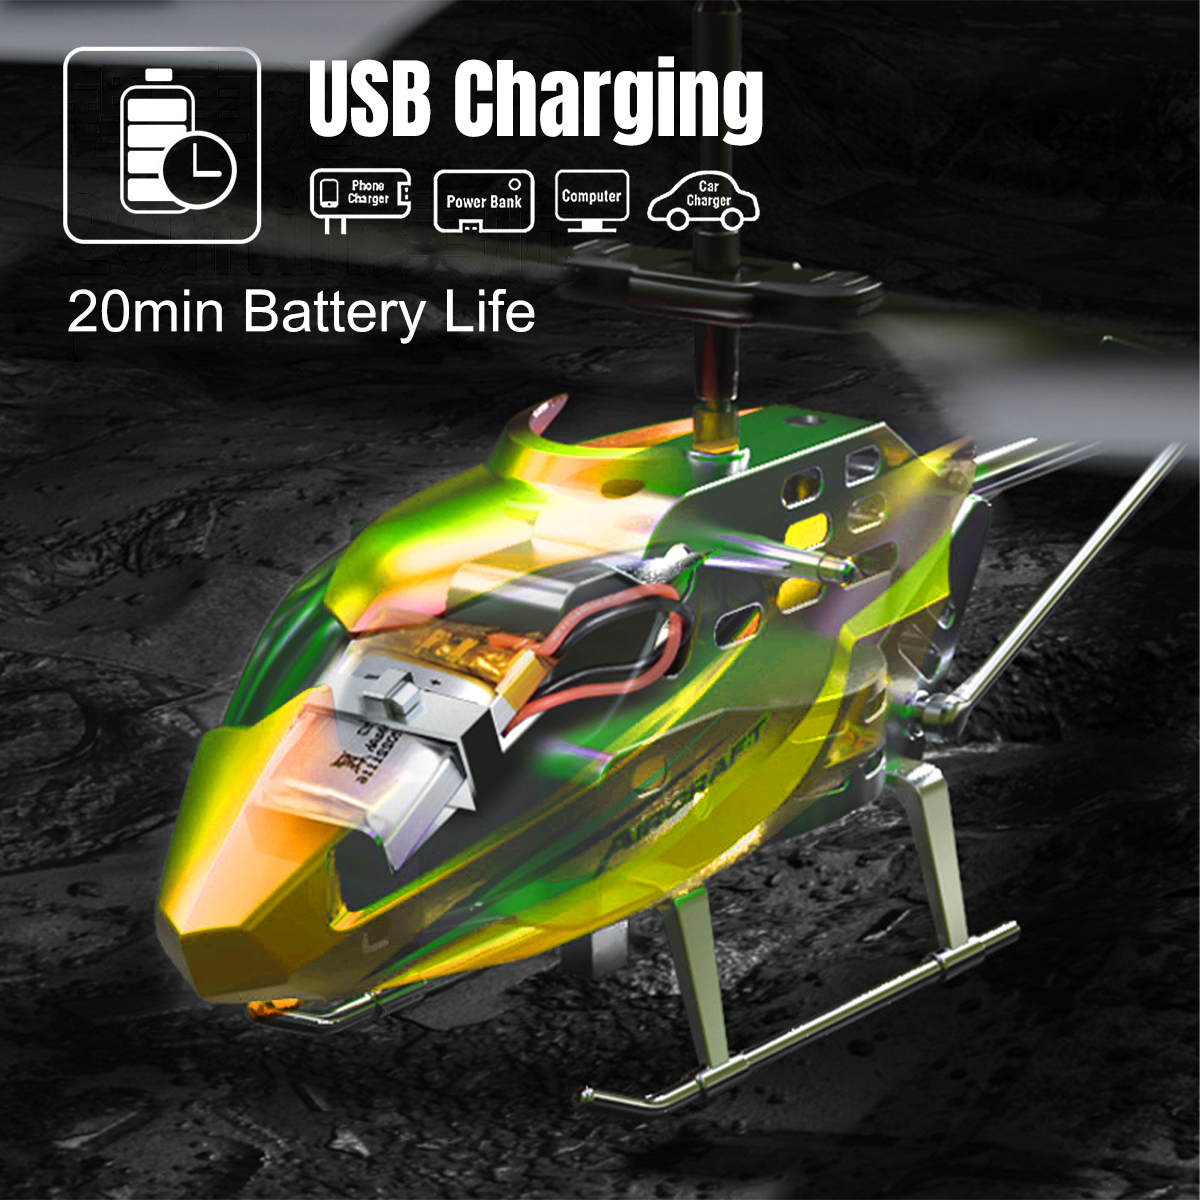 PayUSD Remote Control Helicopter Mini Gyroscope RC Helicopters LED Light for Indoor to Fly for Kids and Beginners, Yellow - image 4 of 8